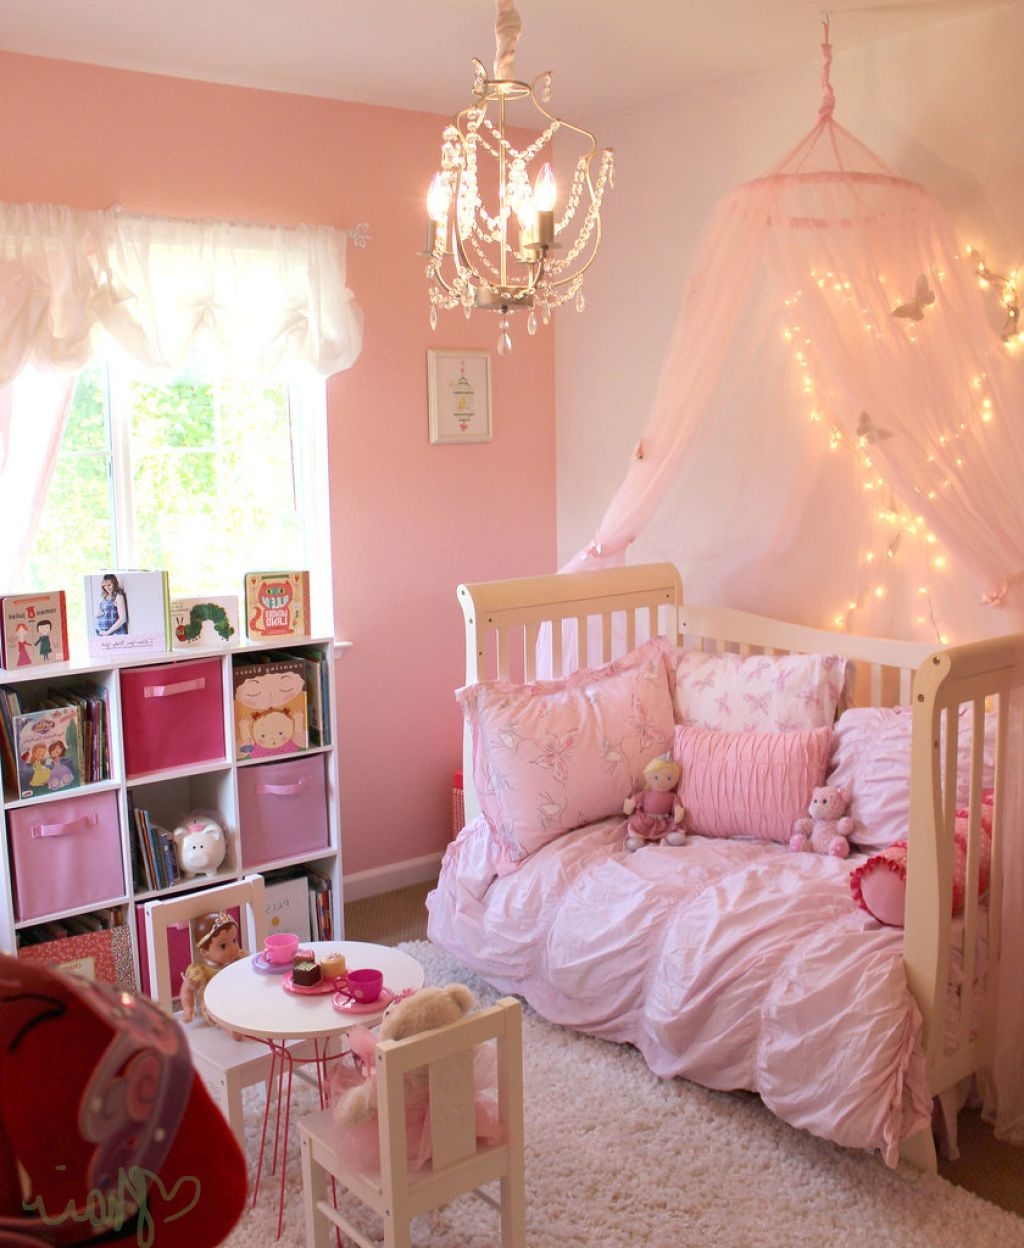 Disney princess bedroom ideas pictures with decoration AMJQTKT